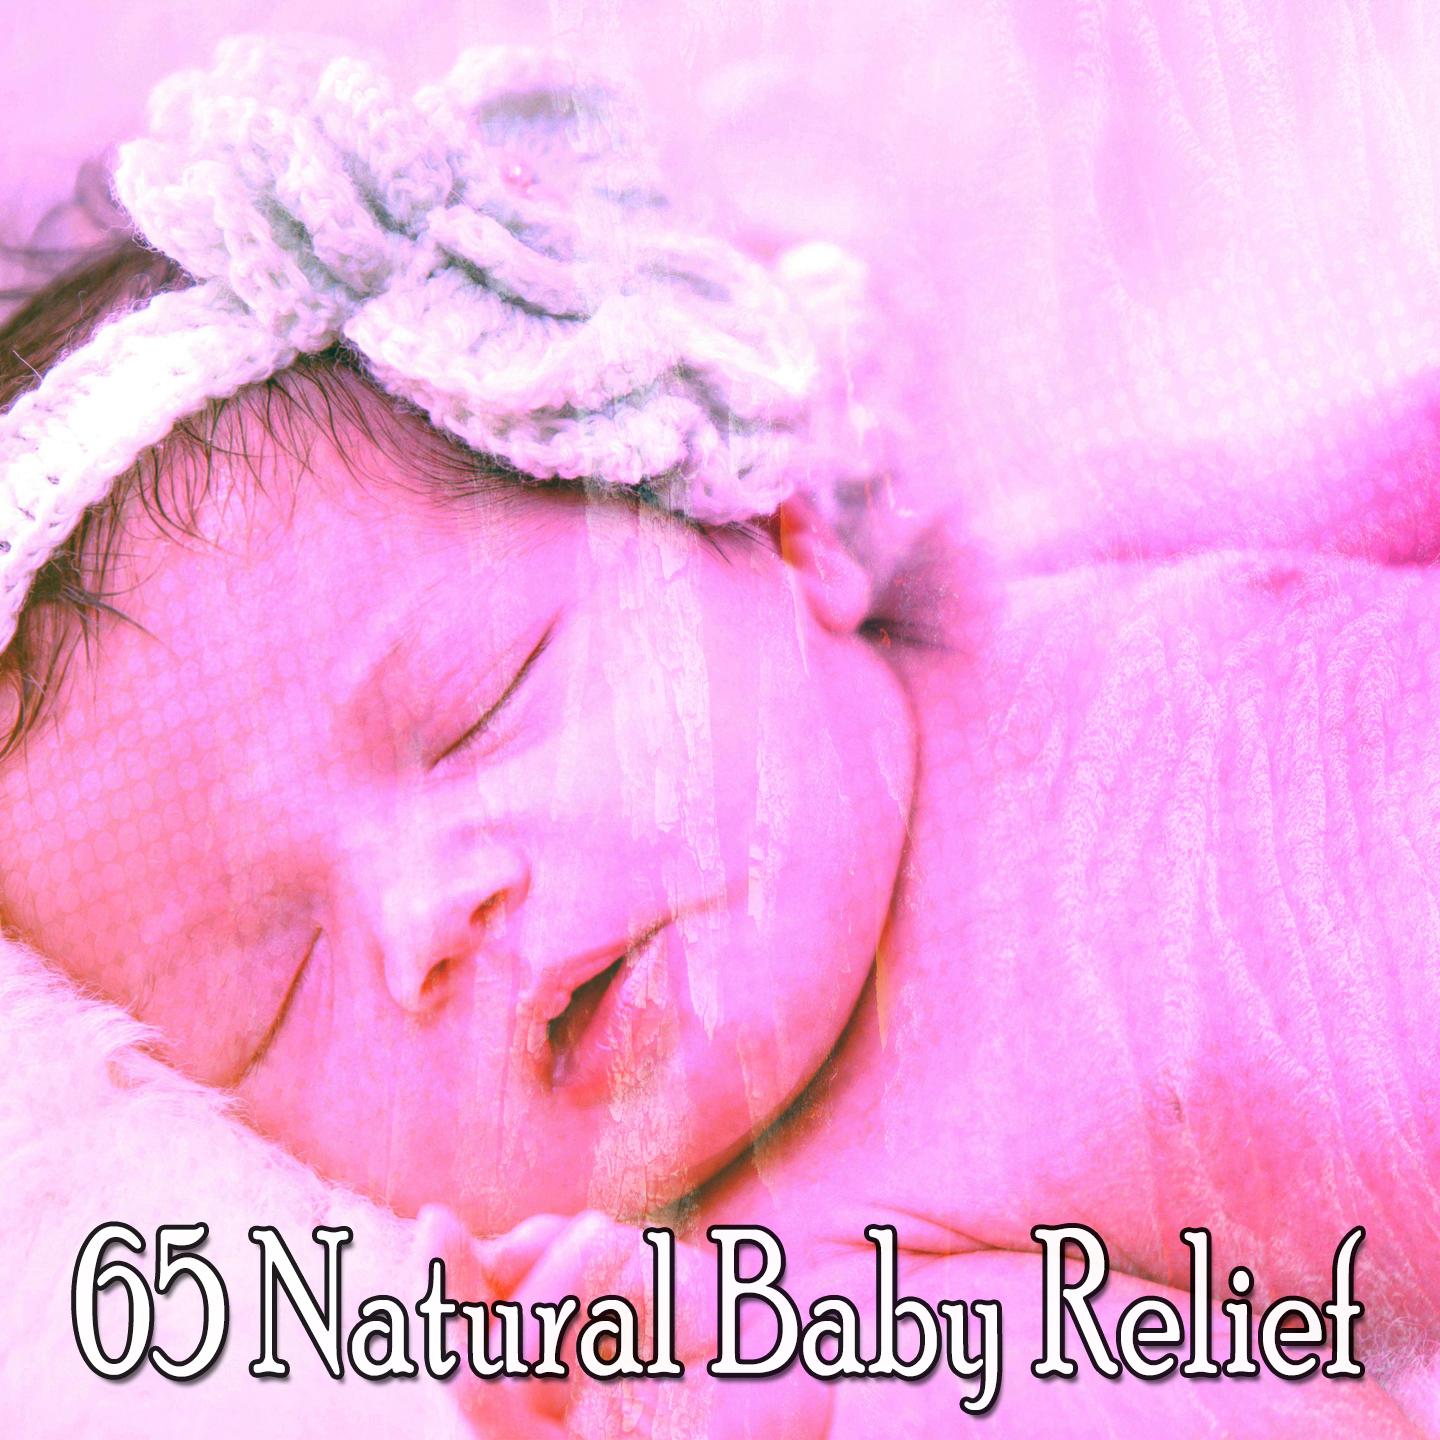 65 Natural Baby Relief